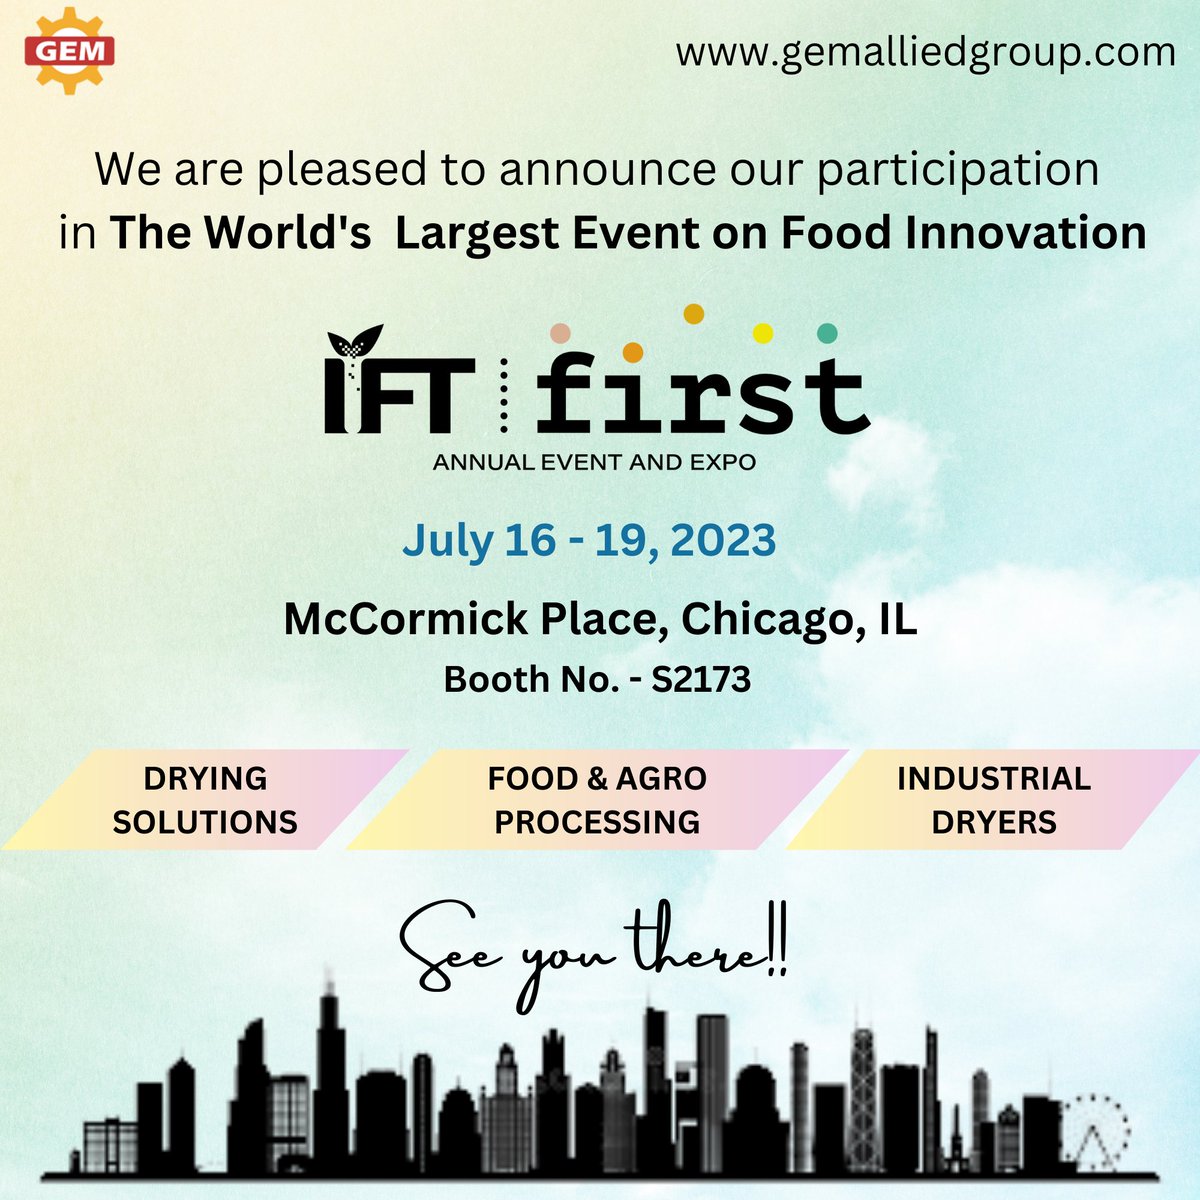 Gem Machinery & Allied Industries is excited to participate in IFT First Chicago, 2023

Come and meet us at booth no. S2173

Message us for setting up a meeting!

#ift2023 #iftfirst #dryingindustry #foodprocessingmachinery #foodprocessing #foodprocessingequipment